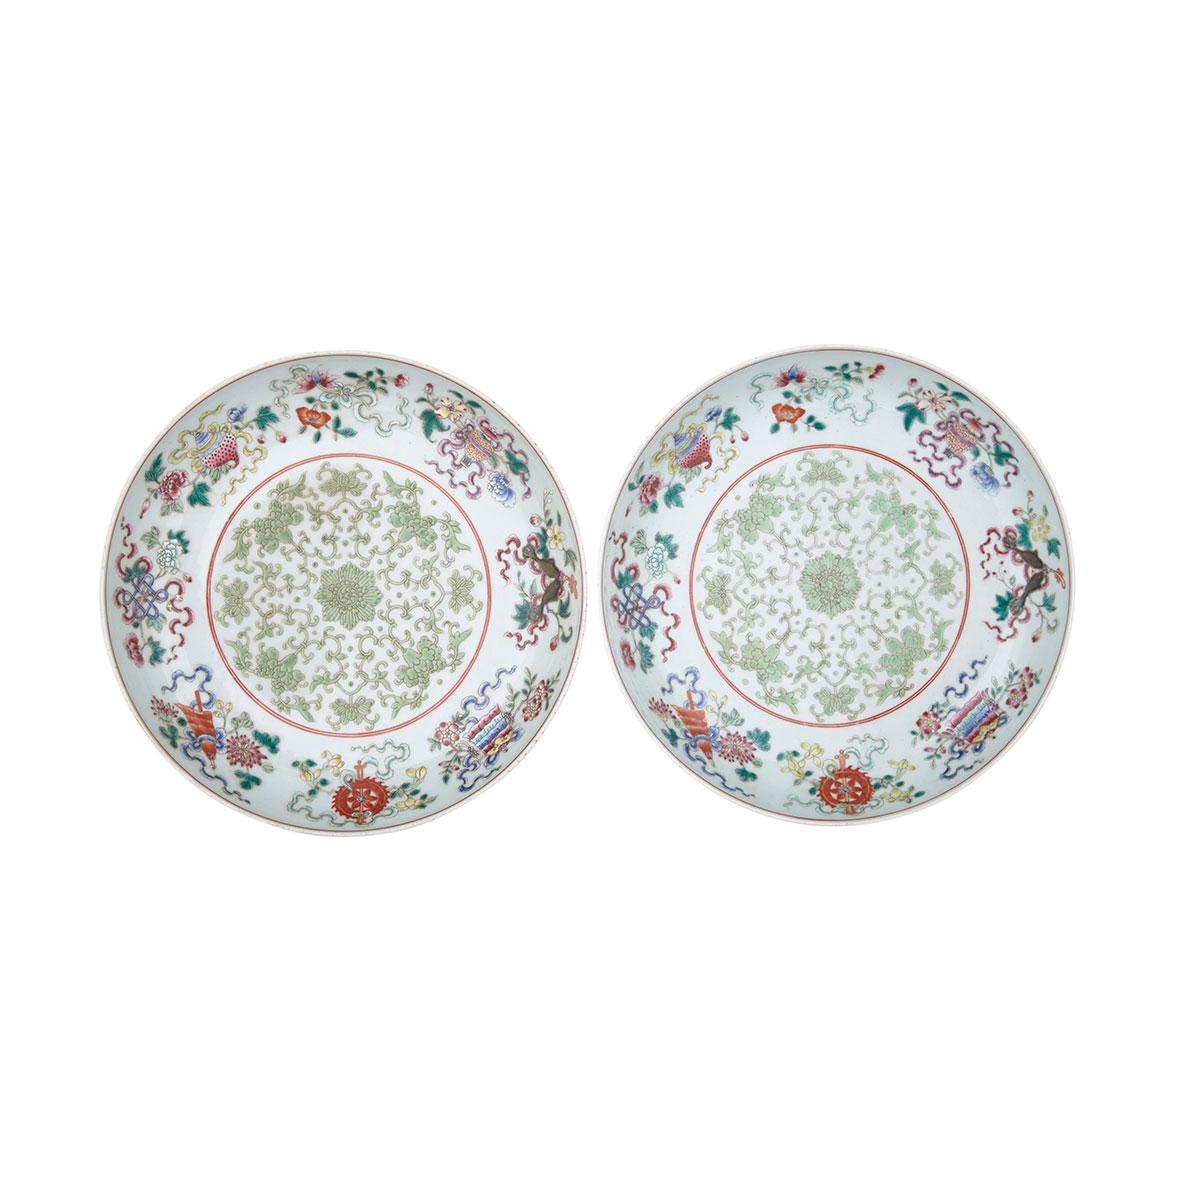 Pair of Famille Rose Buddhist ‘Eight Emblems’ Dishes, Guangxu Mark and Period (1875-1908)